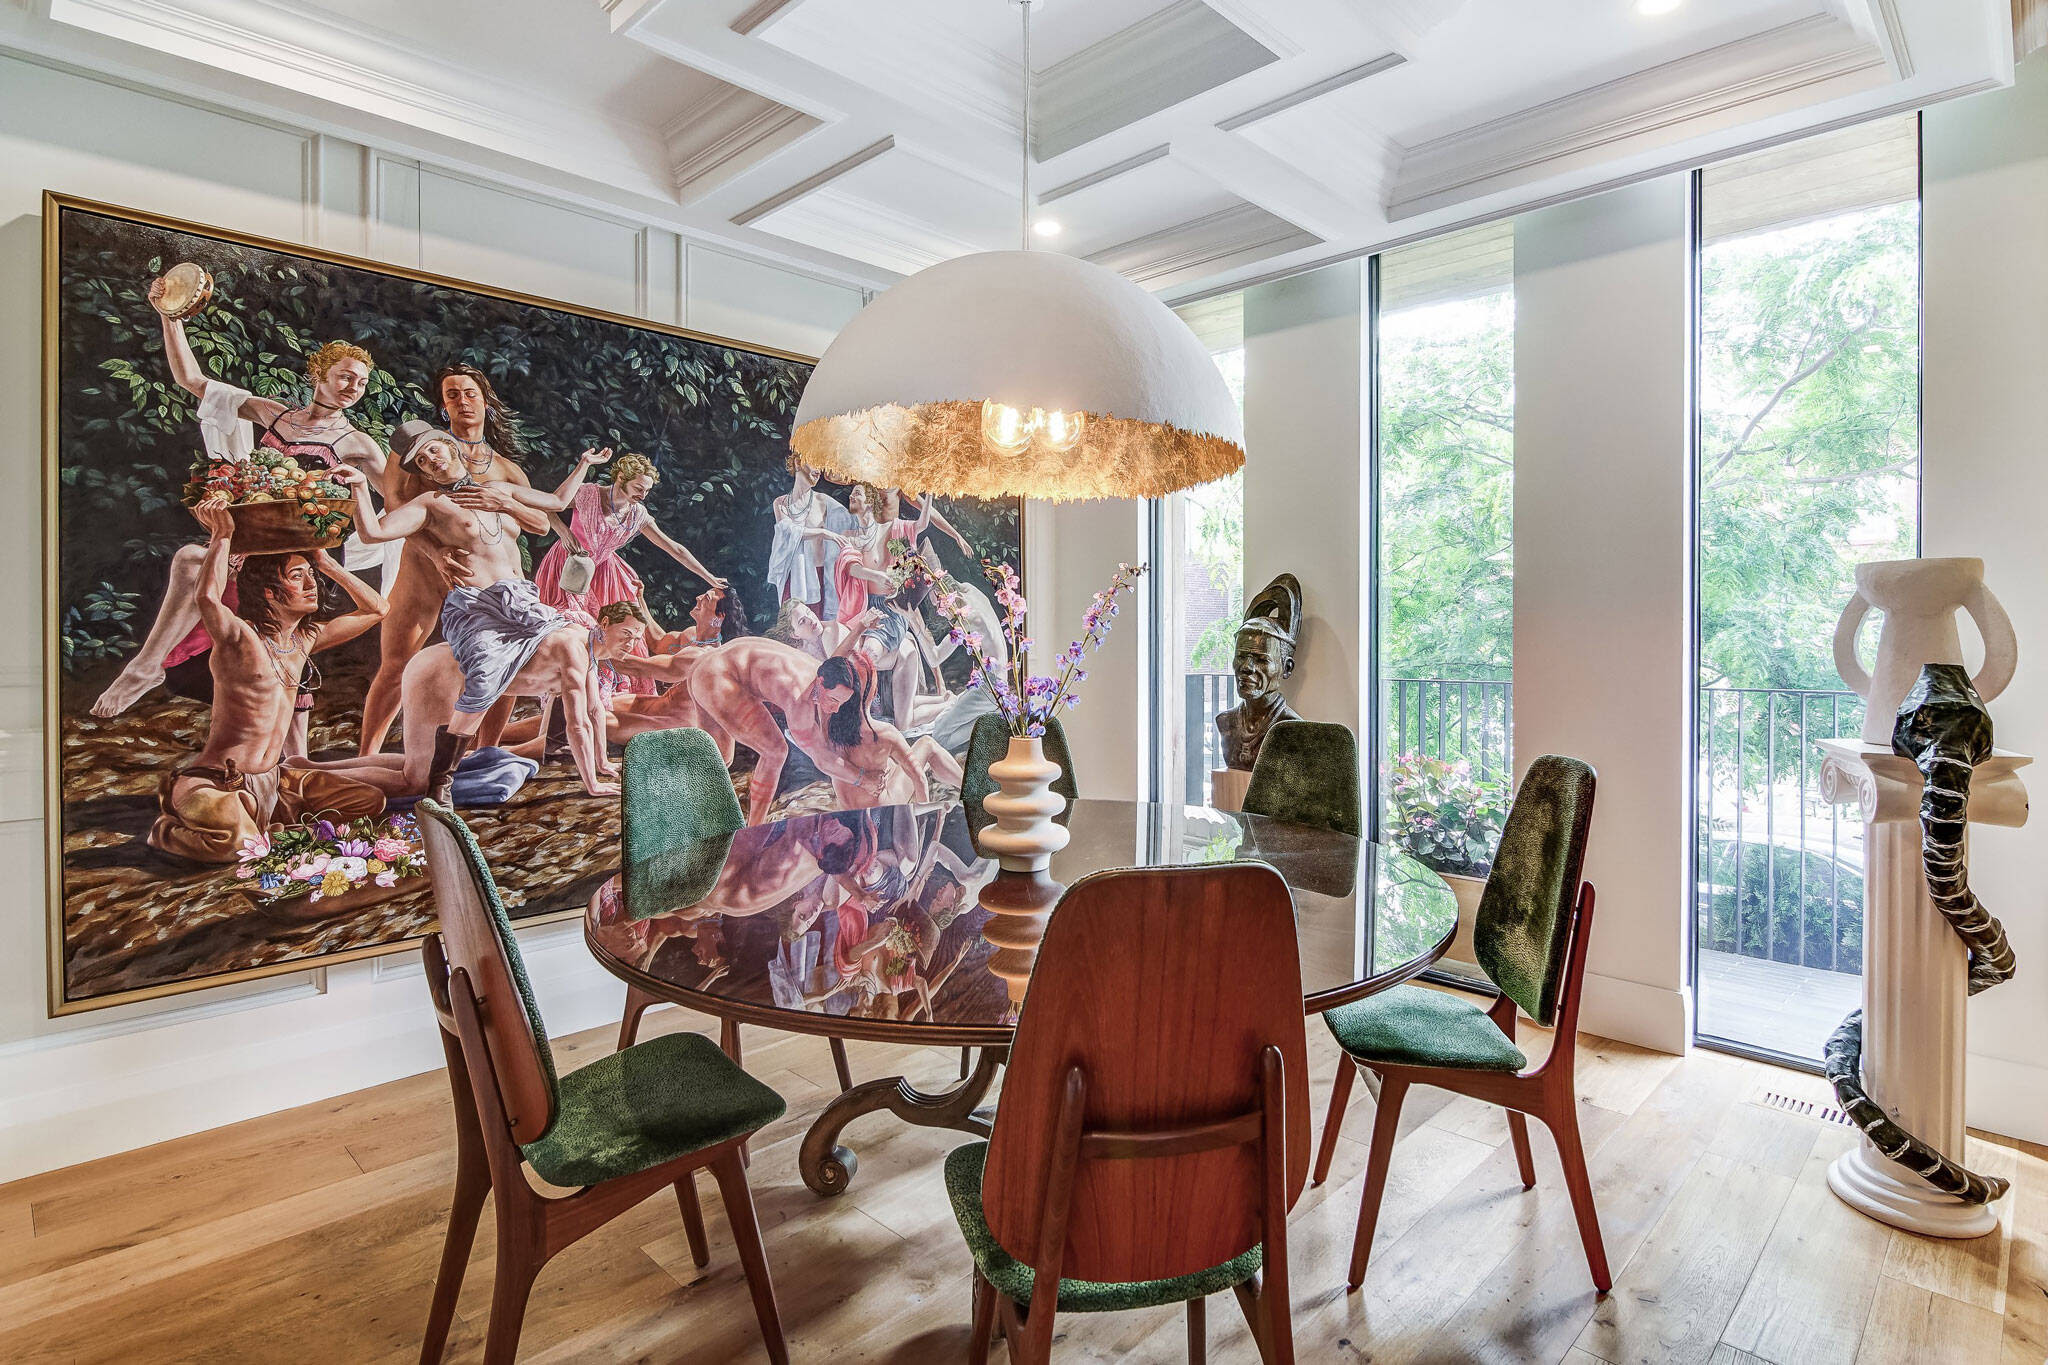 This $4 million Toronto home has the air of a contemporary gallery